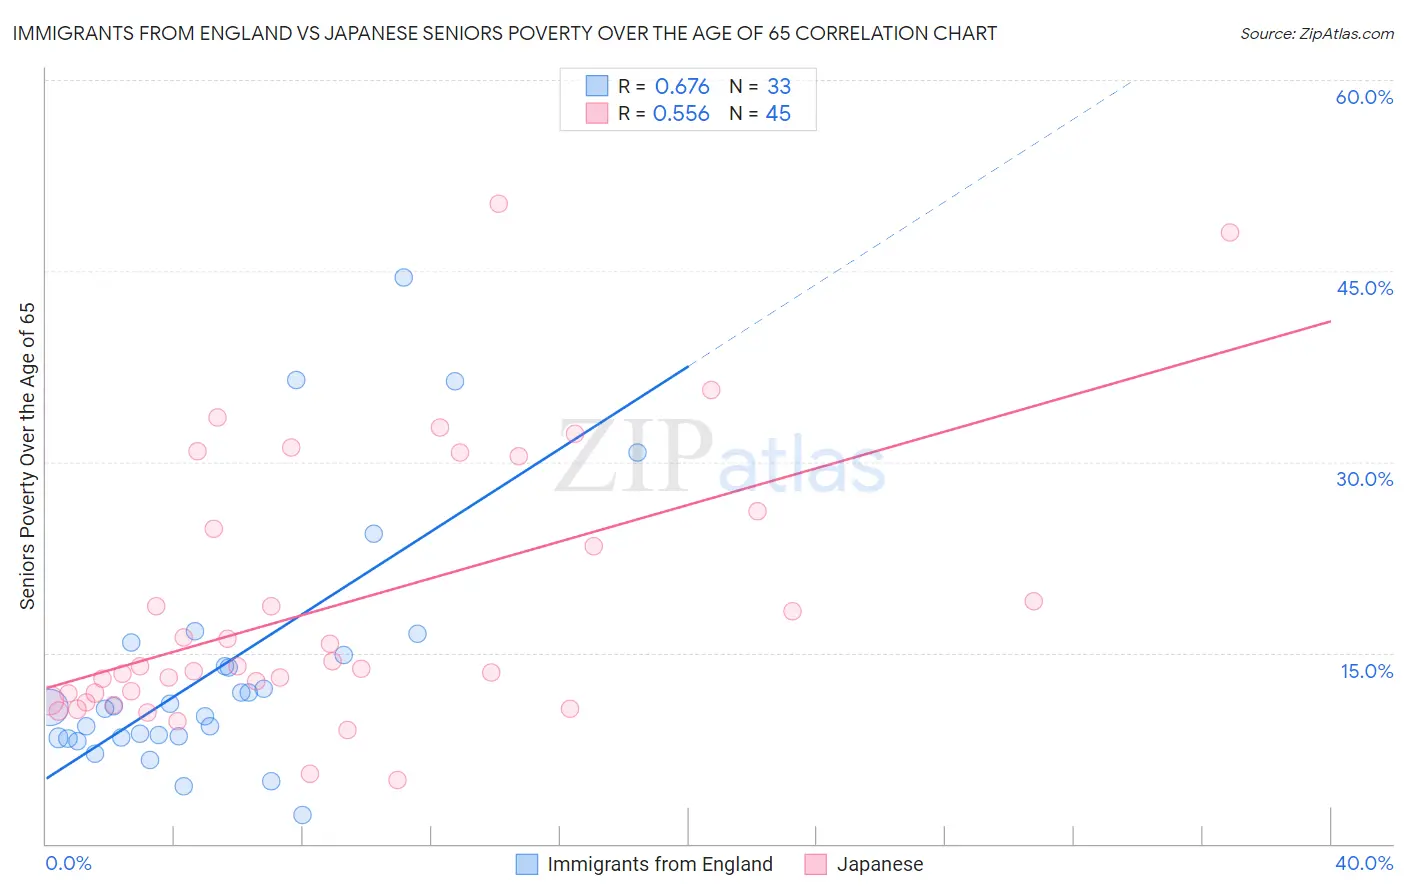 Immigrants from England vs Japanese Seniors Poverty Over the Age of 65